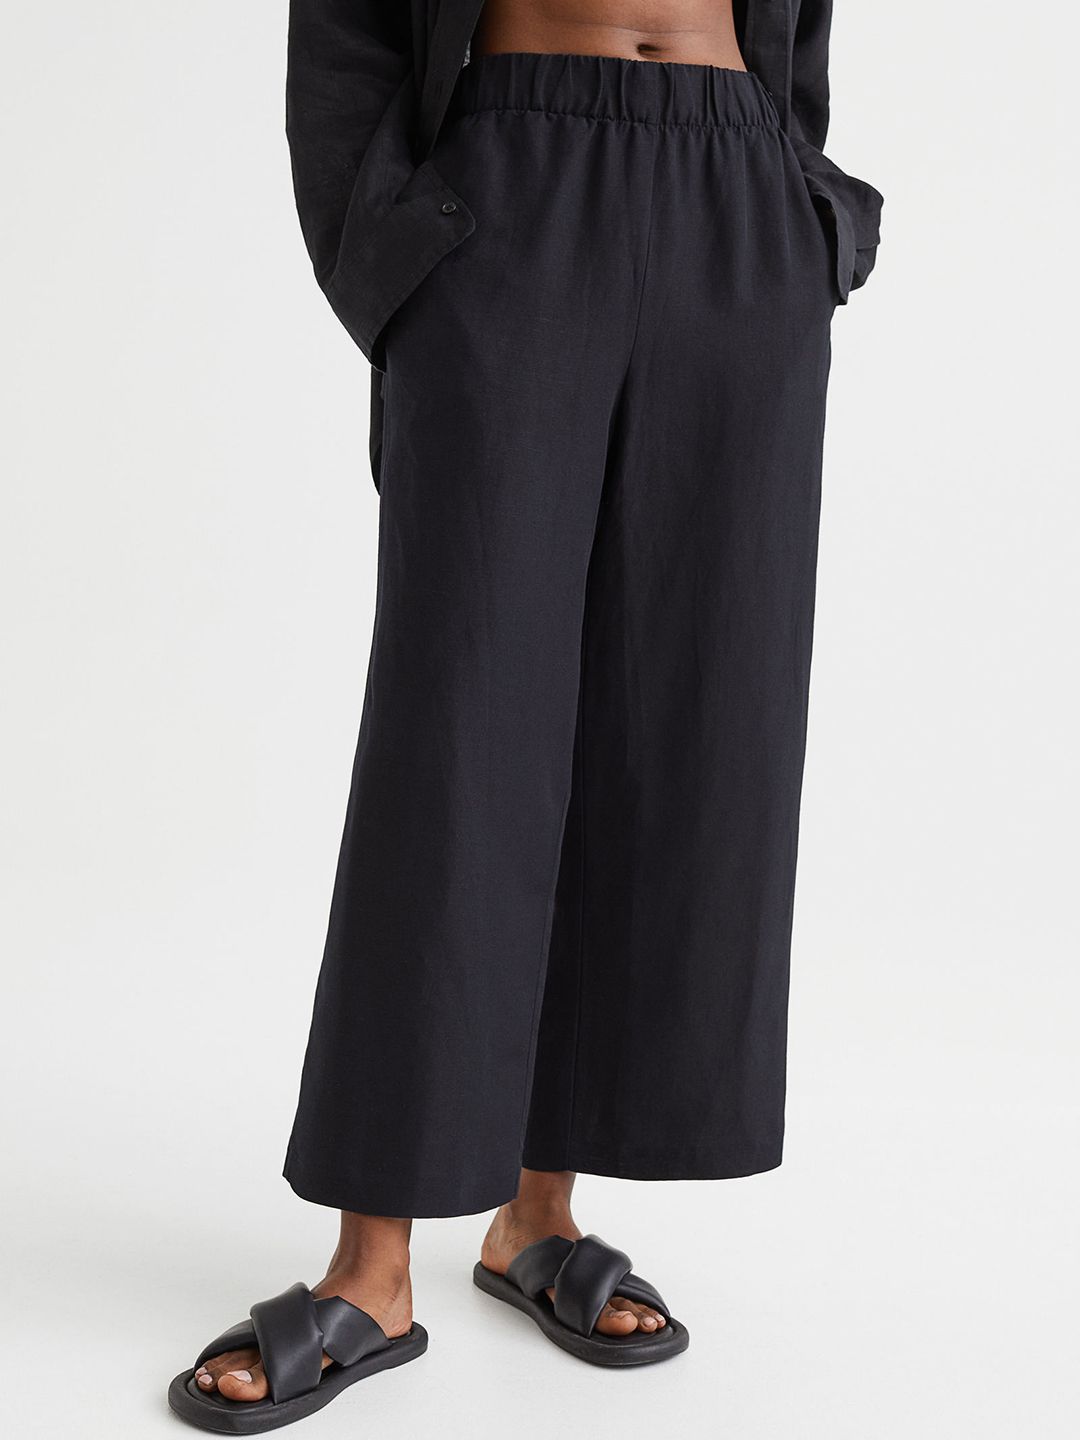 H&M Women Black Wide Linen-blend Trousers Price in India